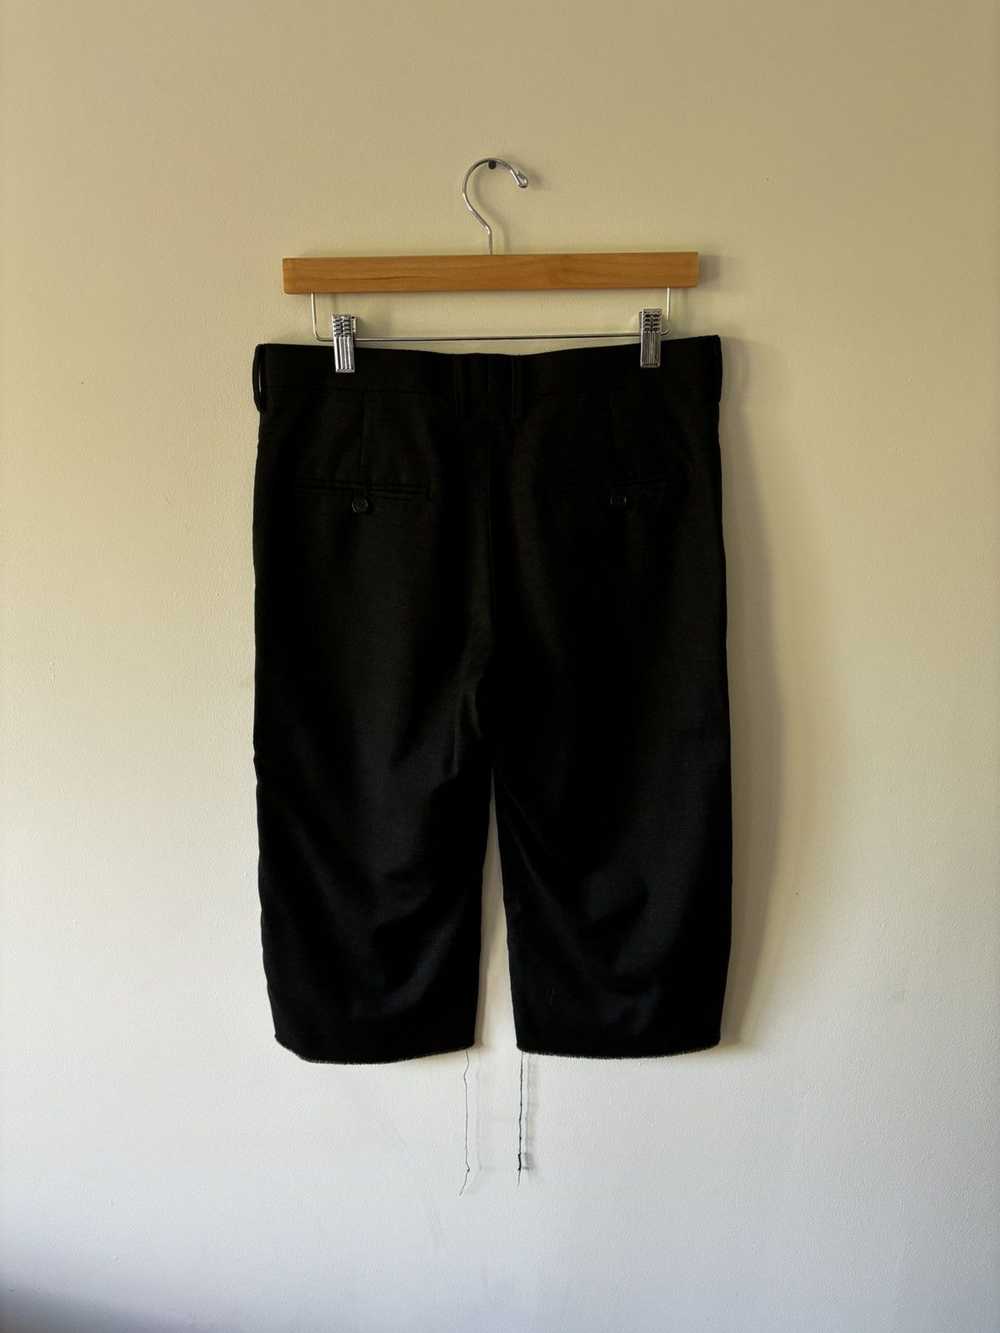 Undercover Undercover SS09 Patti Smith shorts - image 2